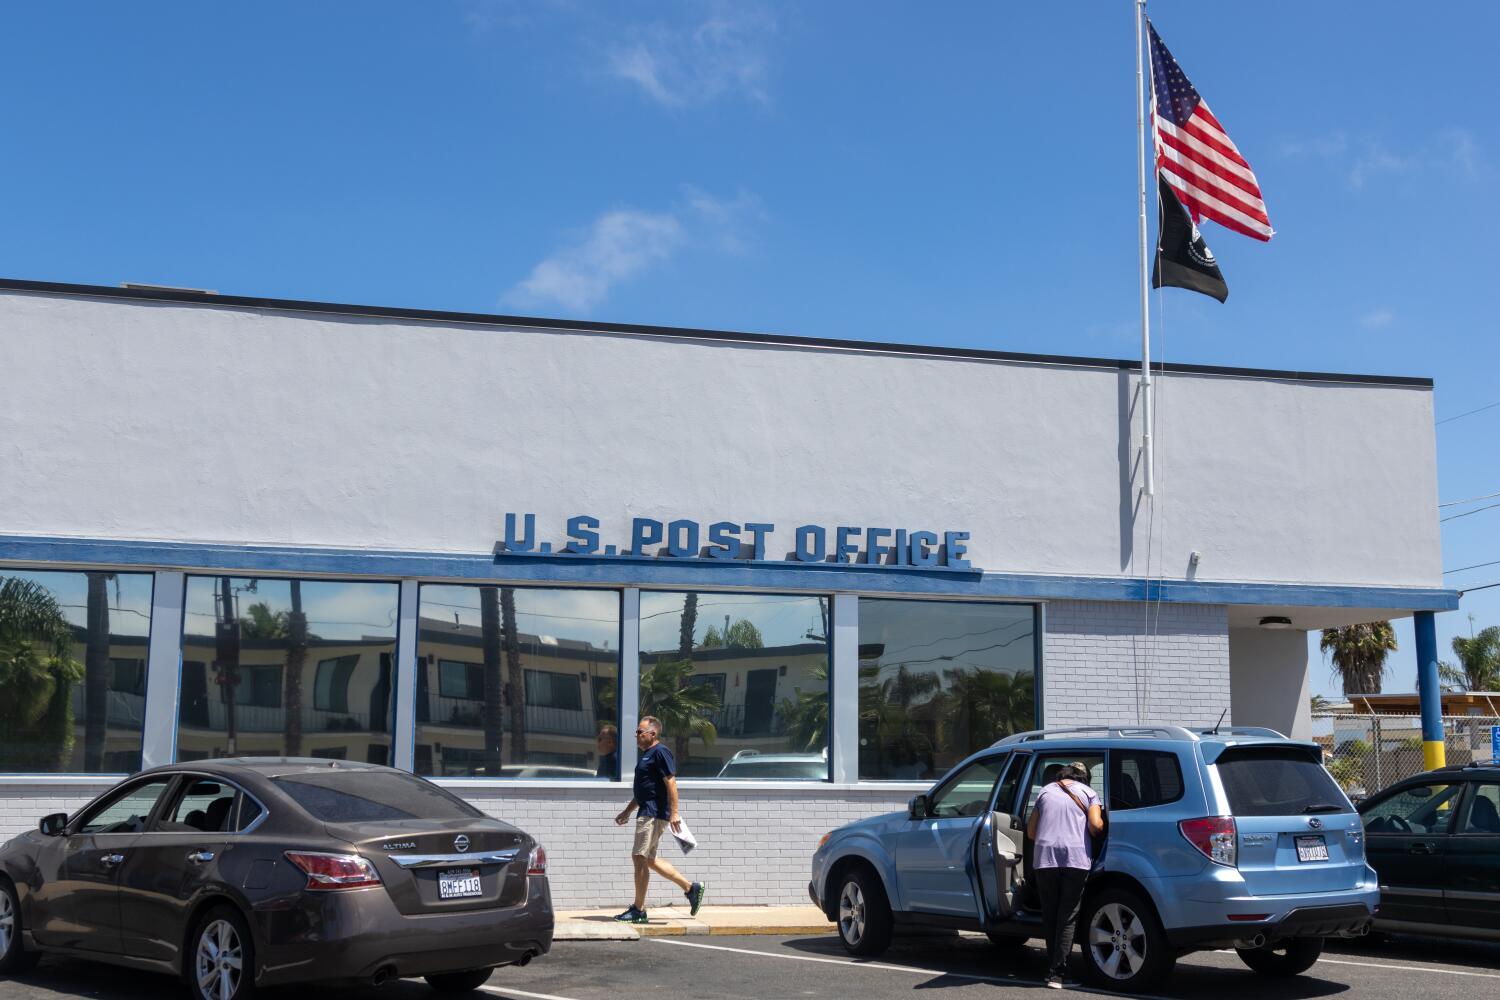 Imperial Beach, CA - August 03: View of the Imperial Beach Post Office on Thursday, August 3, 2023.